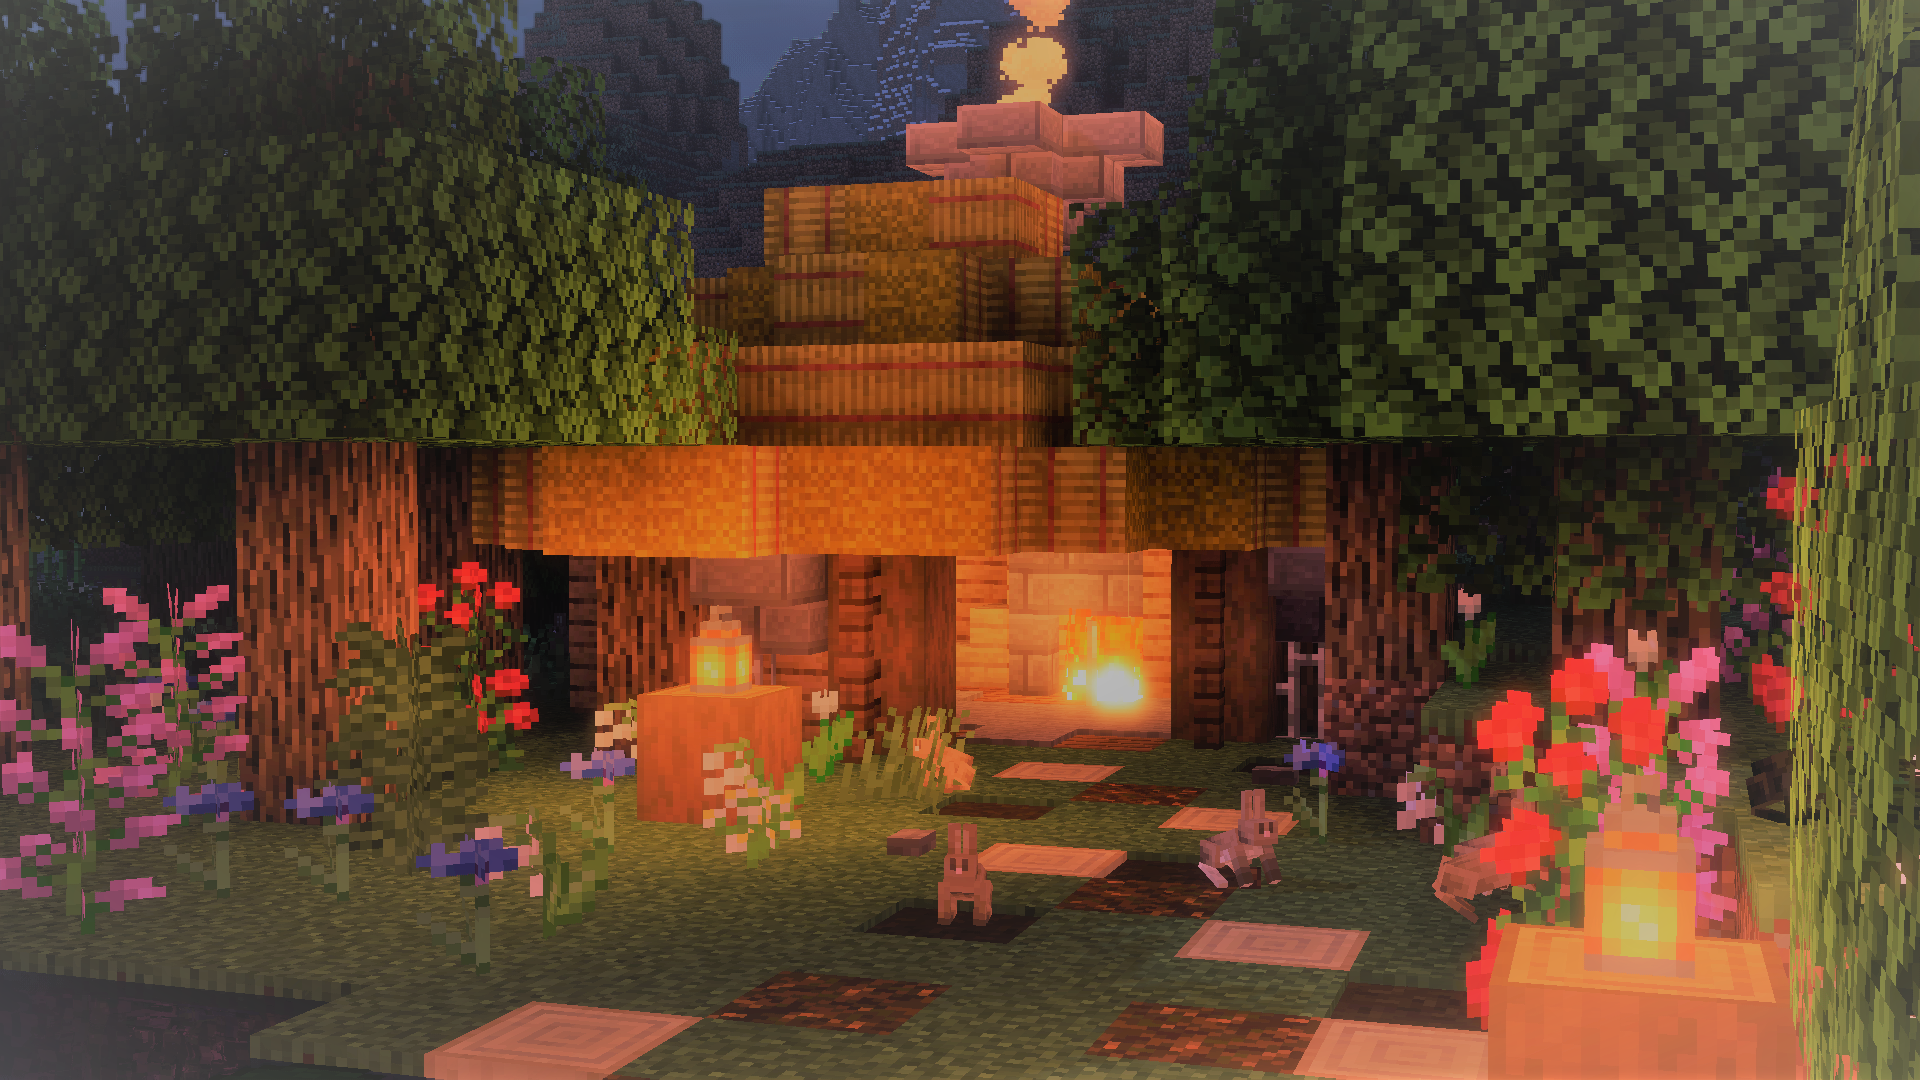 New Favorite Aesthetic: minecraft cottage core